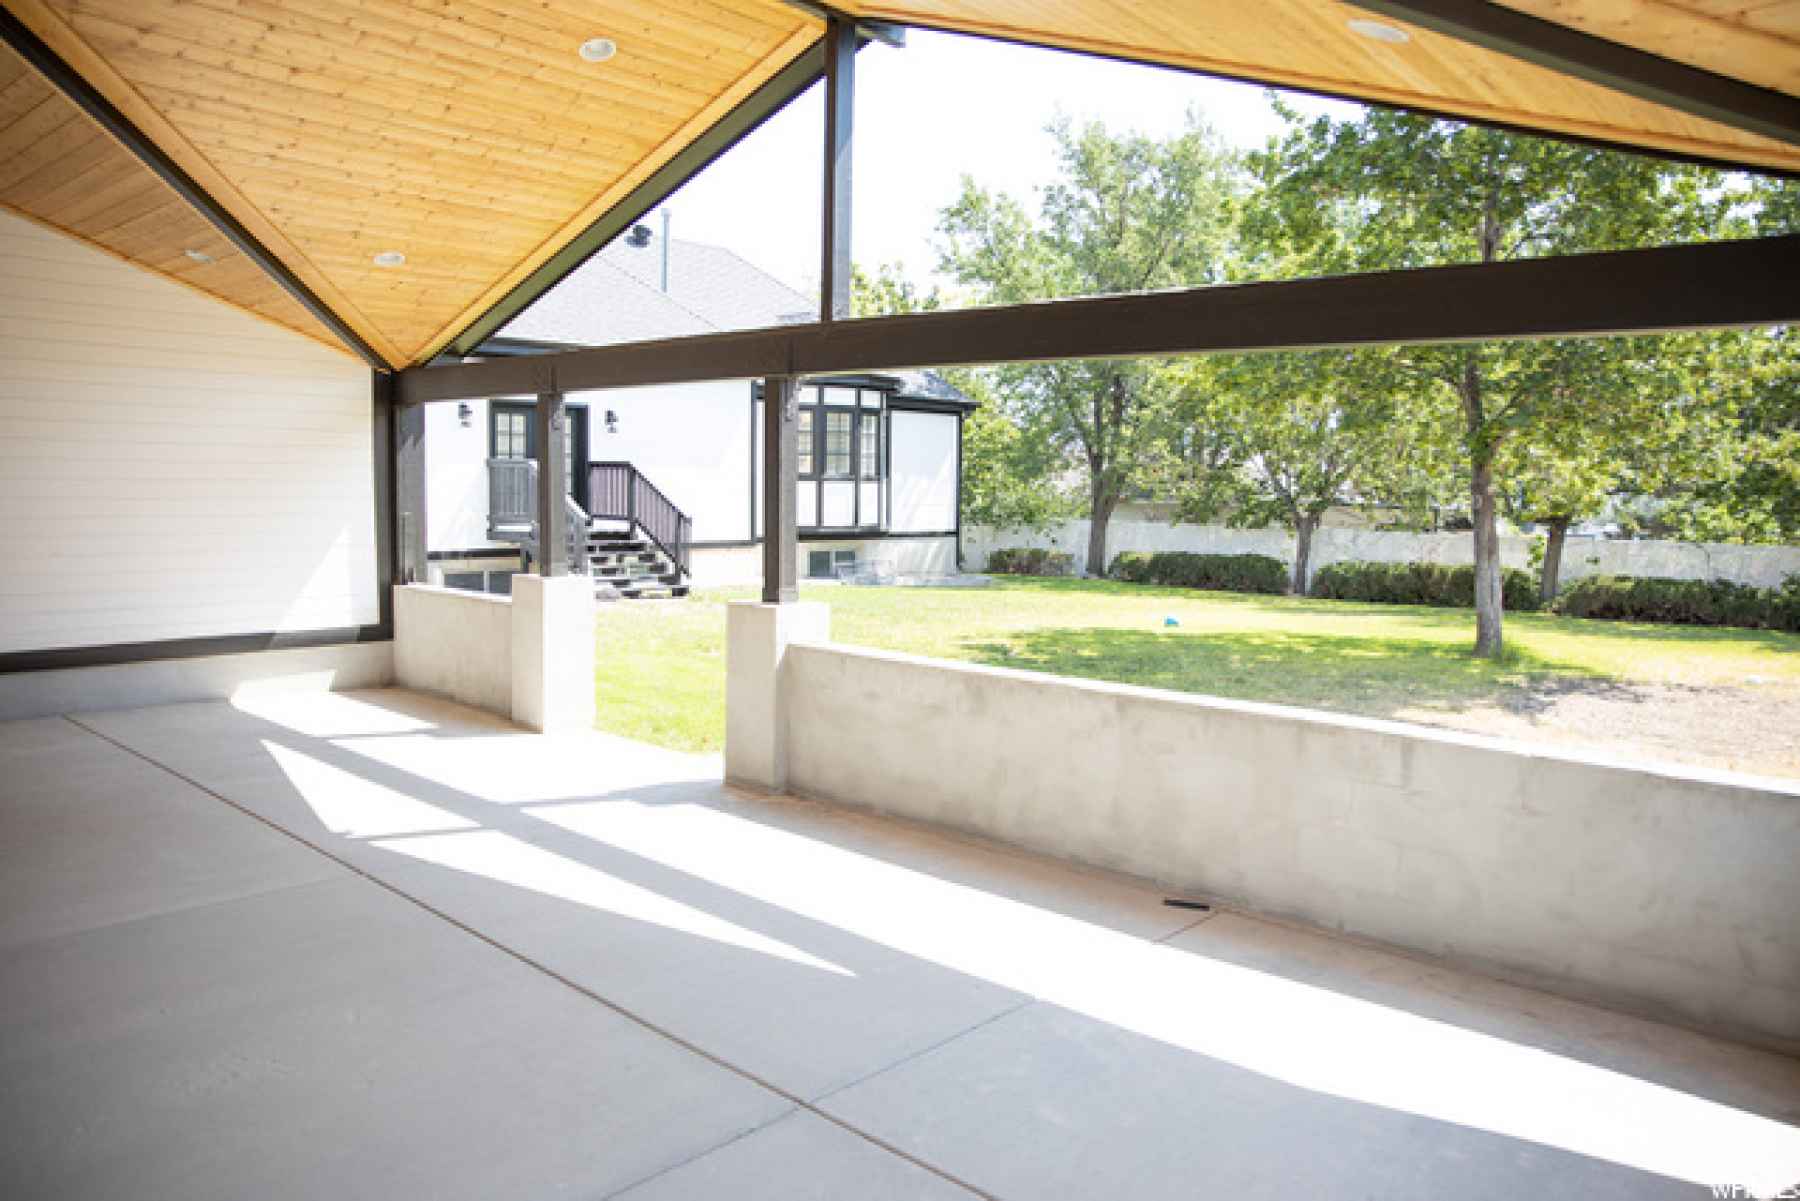 Beautiful covered patio with vaulted natural wood ceiling and recessed lighting! this would be a great pool house apartment and deck if you wanted to add a pool in the backyard!